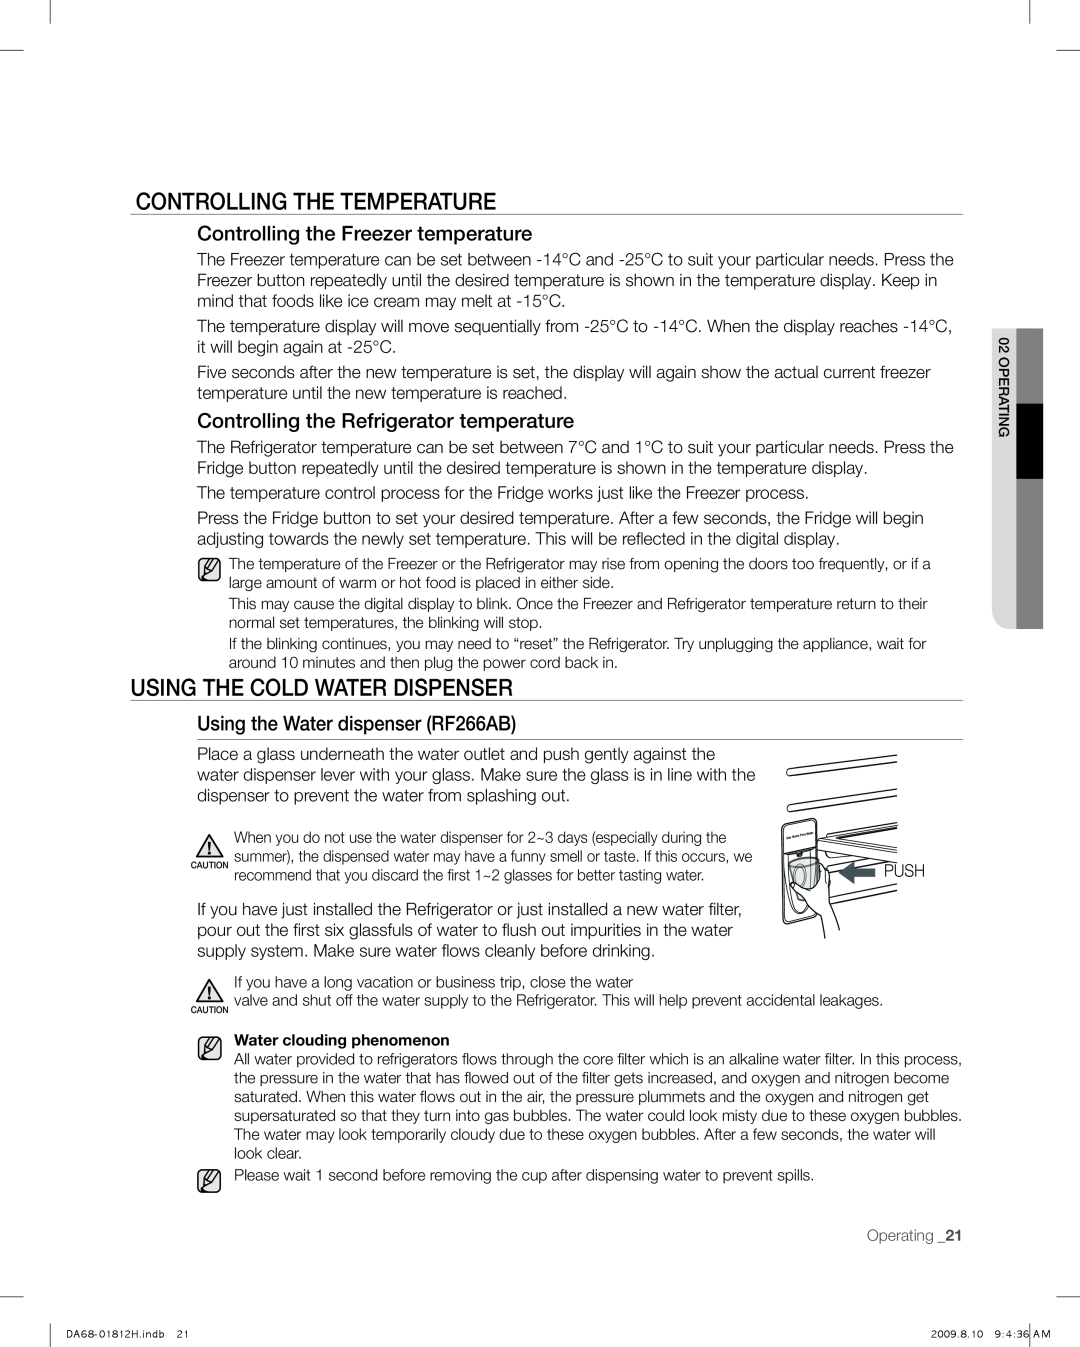 Samsung RF263 user manual Controlling The Temperature, Using The Cold Water Dispenser, Controlling the Freezer temperature 